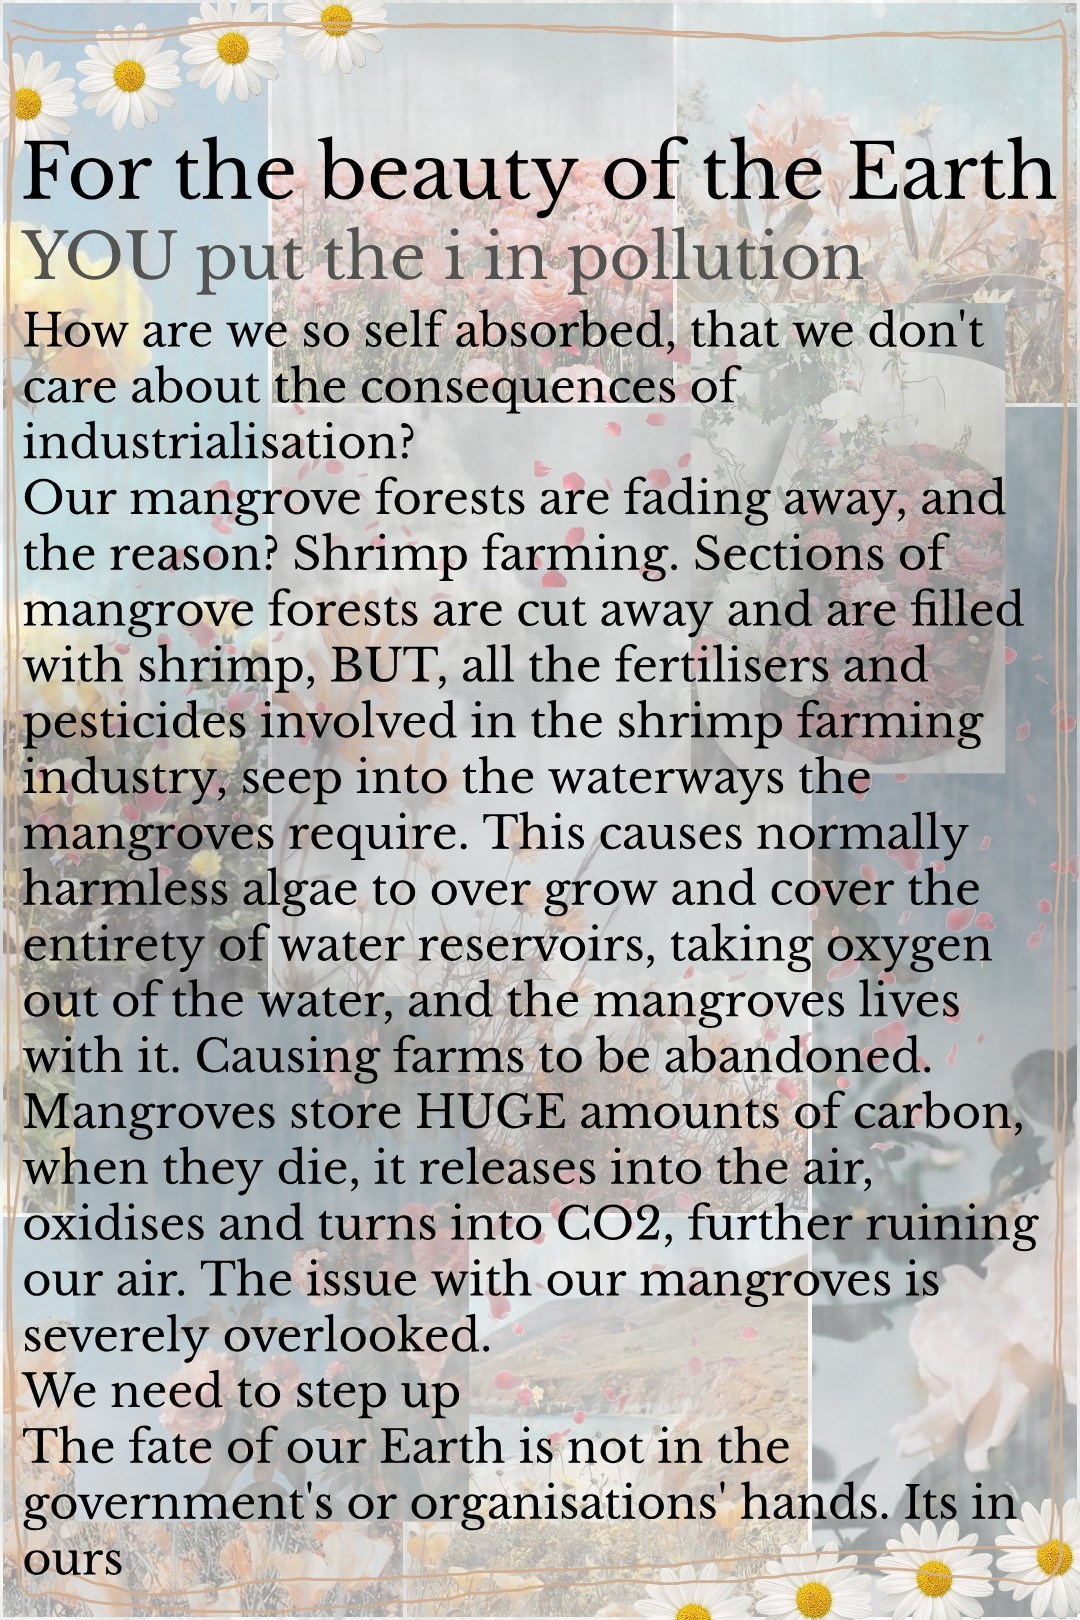 🌿Tap🌿 
Our mangroves are severely overlooked. Coastal mangroves are some of the most carbon rich and productive forests on Earth. We need to start sustainable farming - or none at all in mangrove growing areas! 
26/8